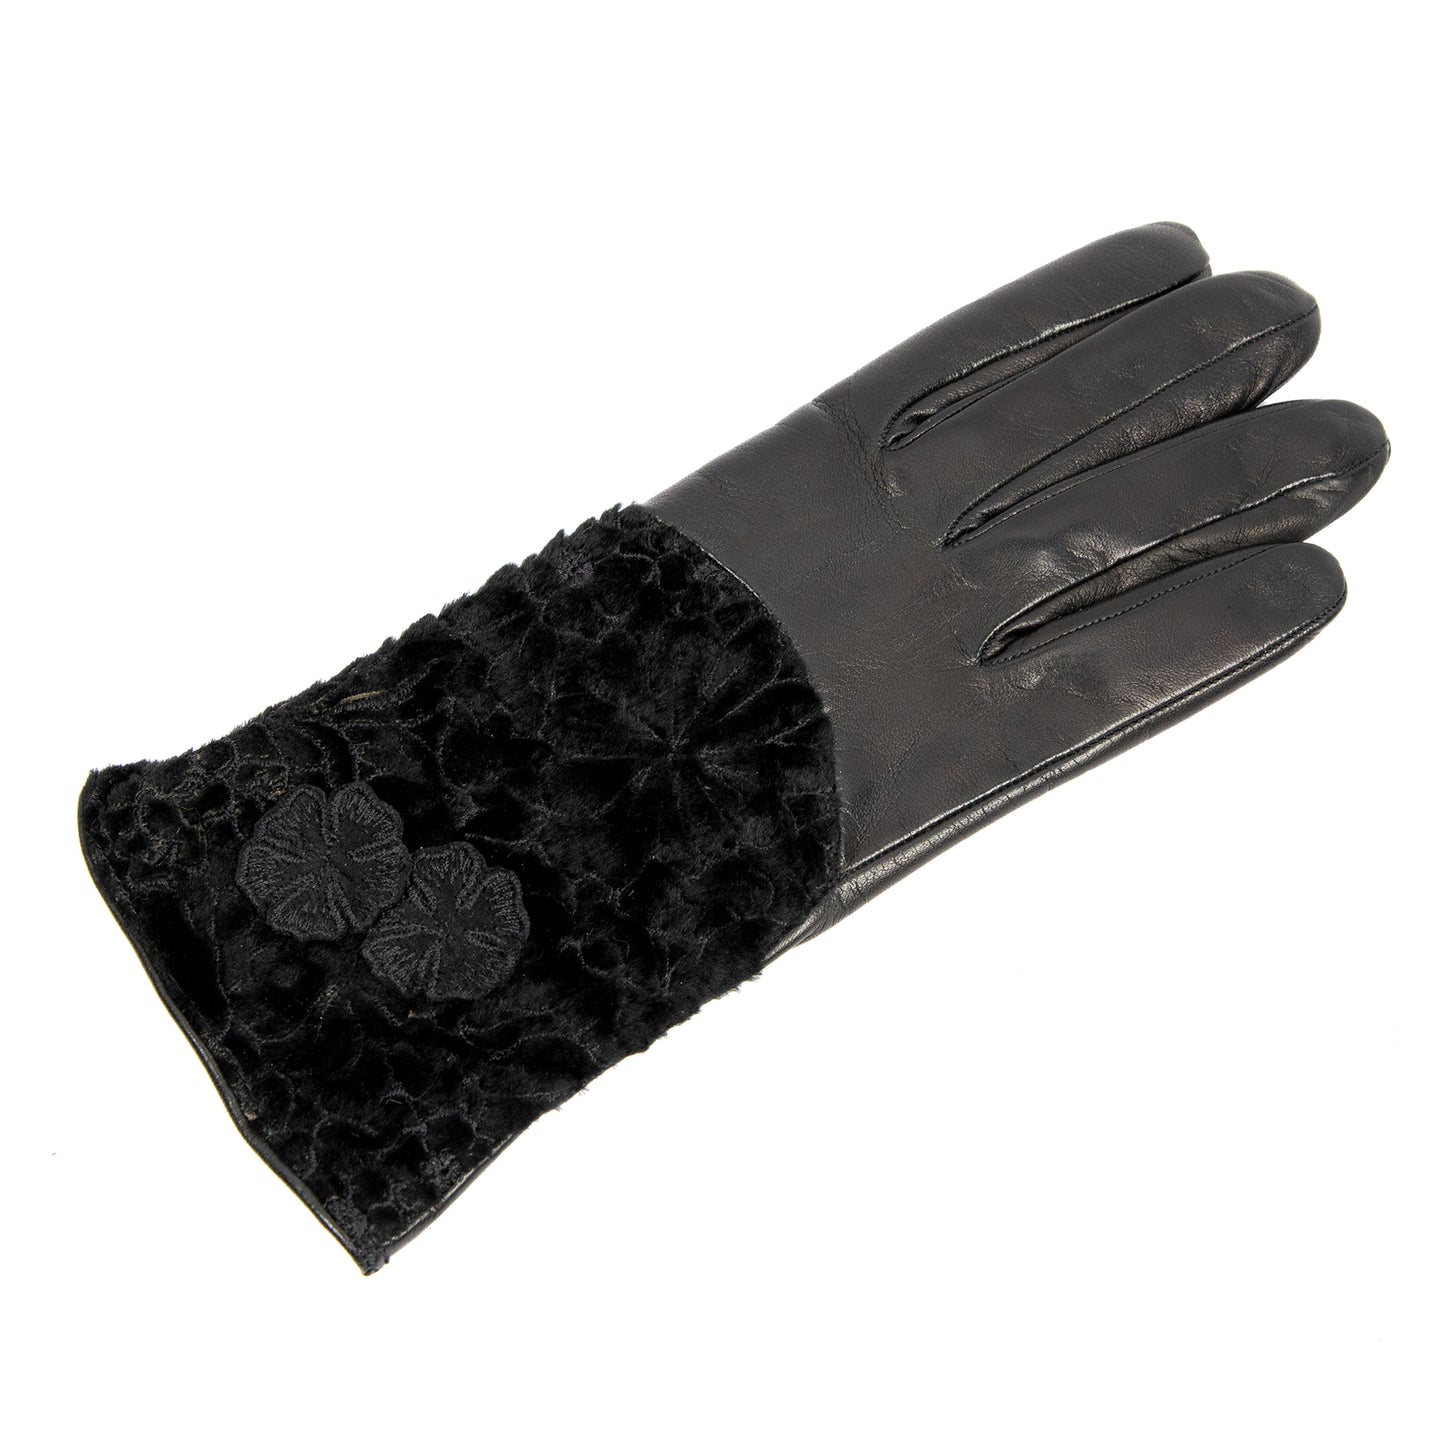 Women's black nappa leather gloves with floral embroidered fur on top